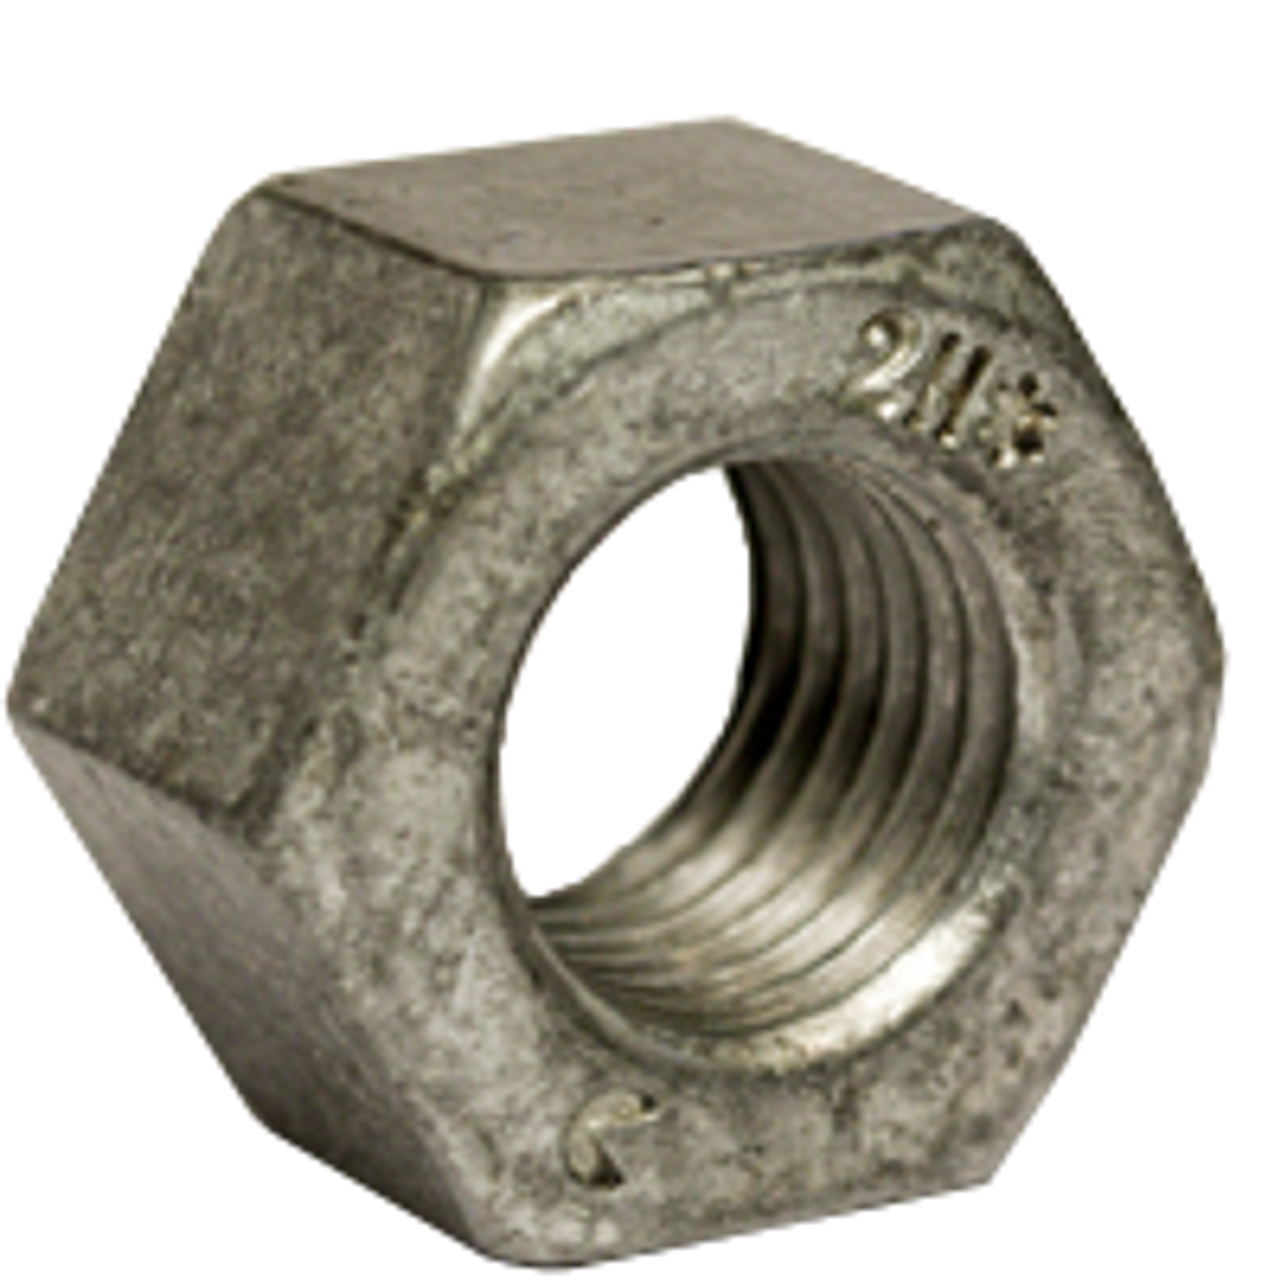 2H Heavy Hex Nuts, ASTM A194 Grade 2H Heavy Hex Nut